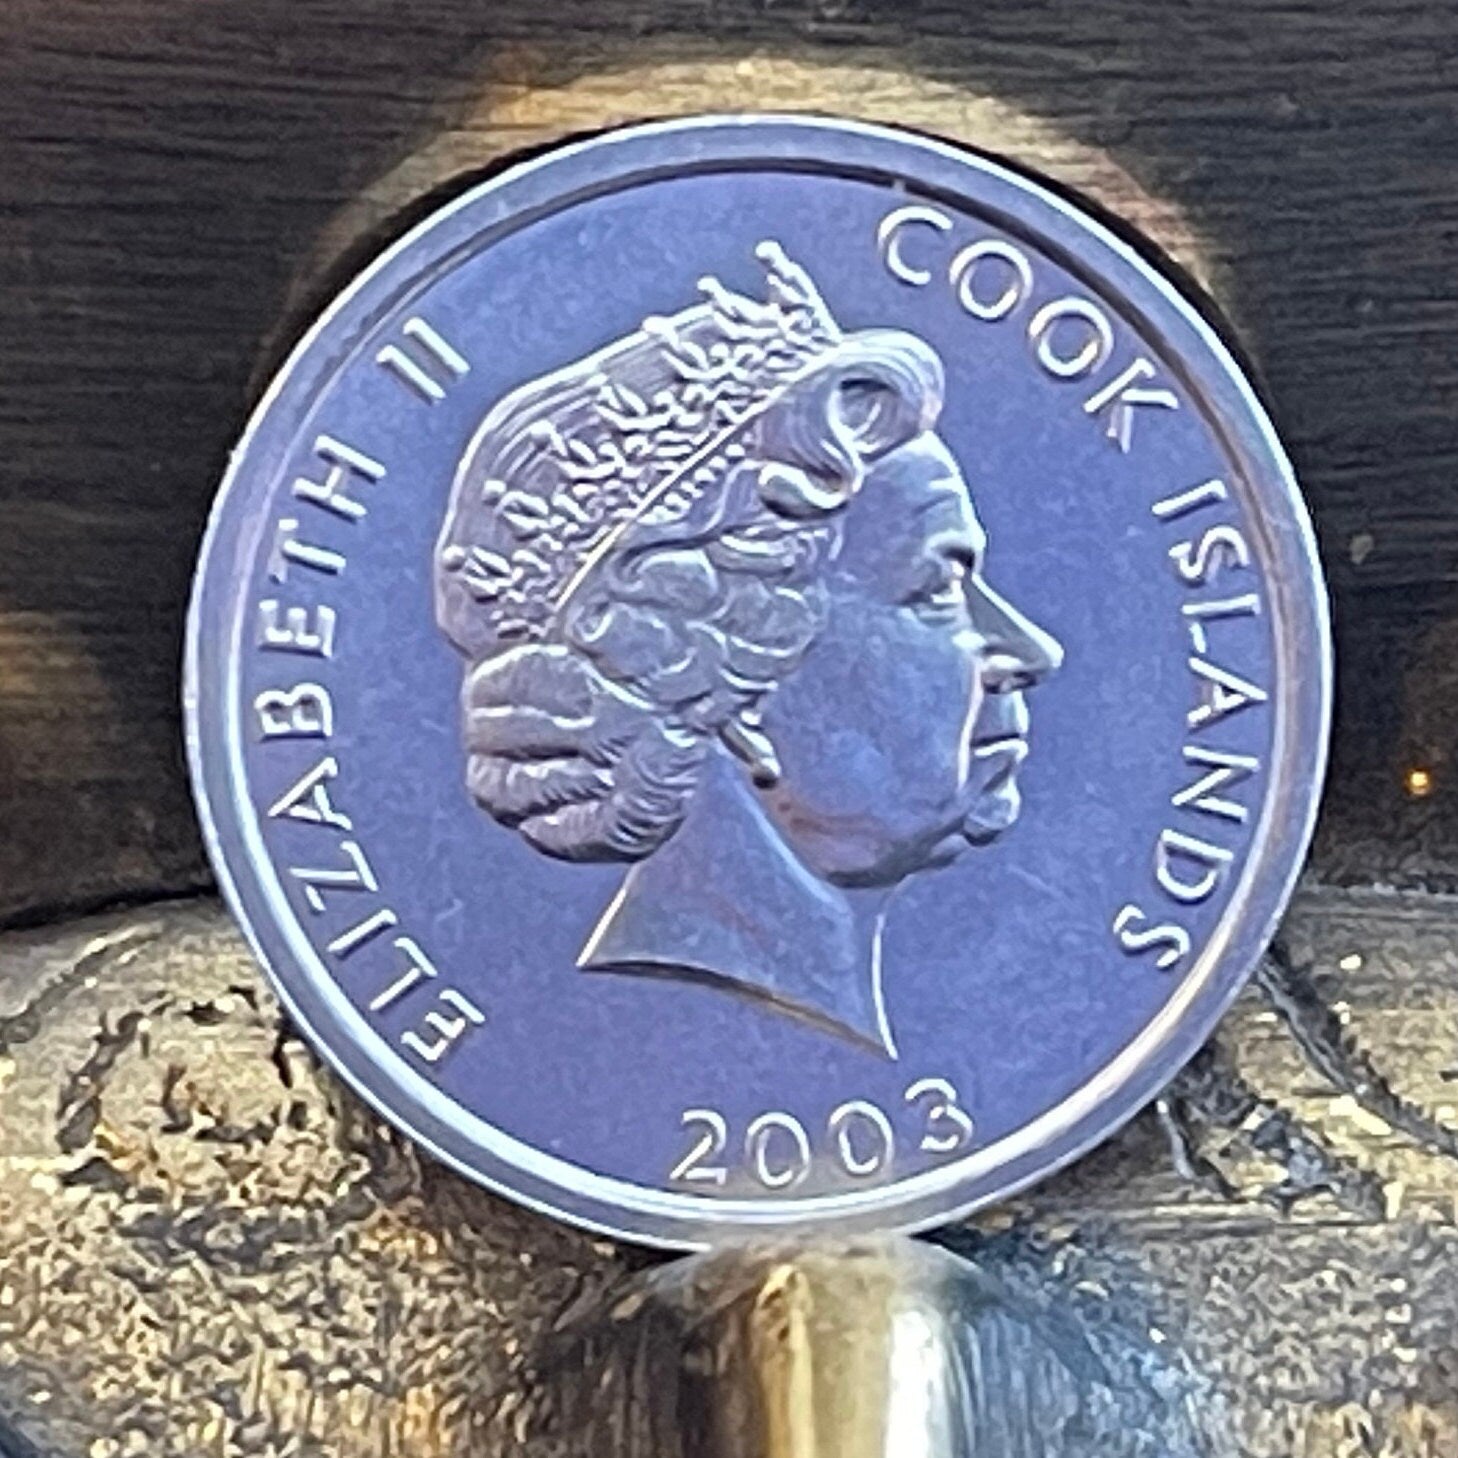 Border Collie Cook Islands 1 Cent Authentic Coin Money for Jewelry and Craft Making